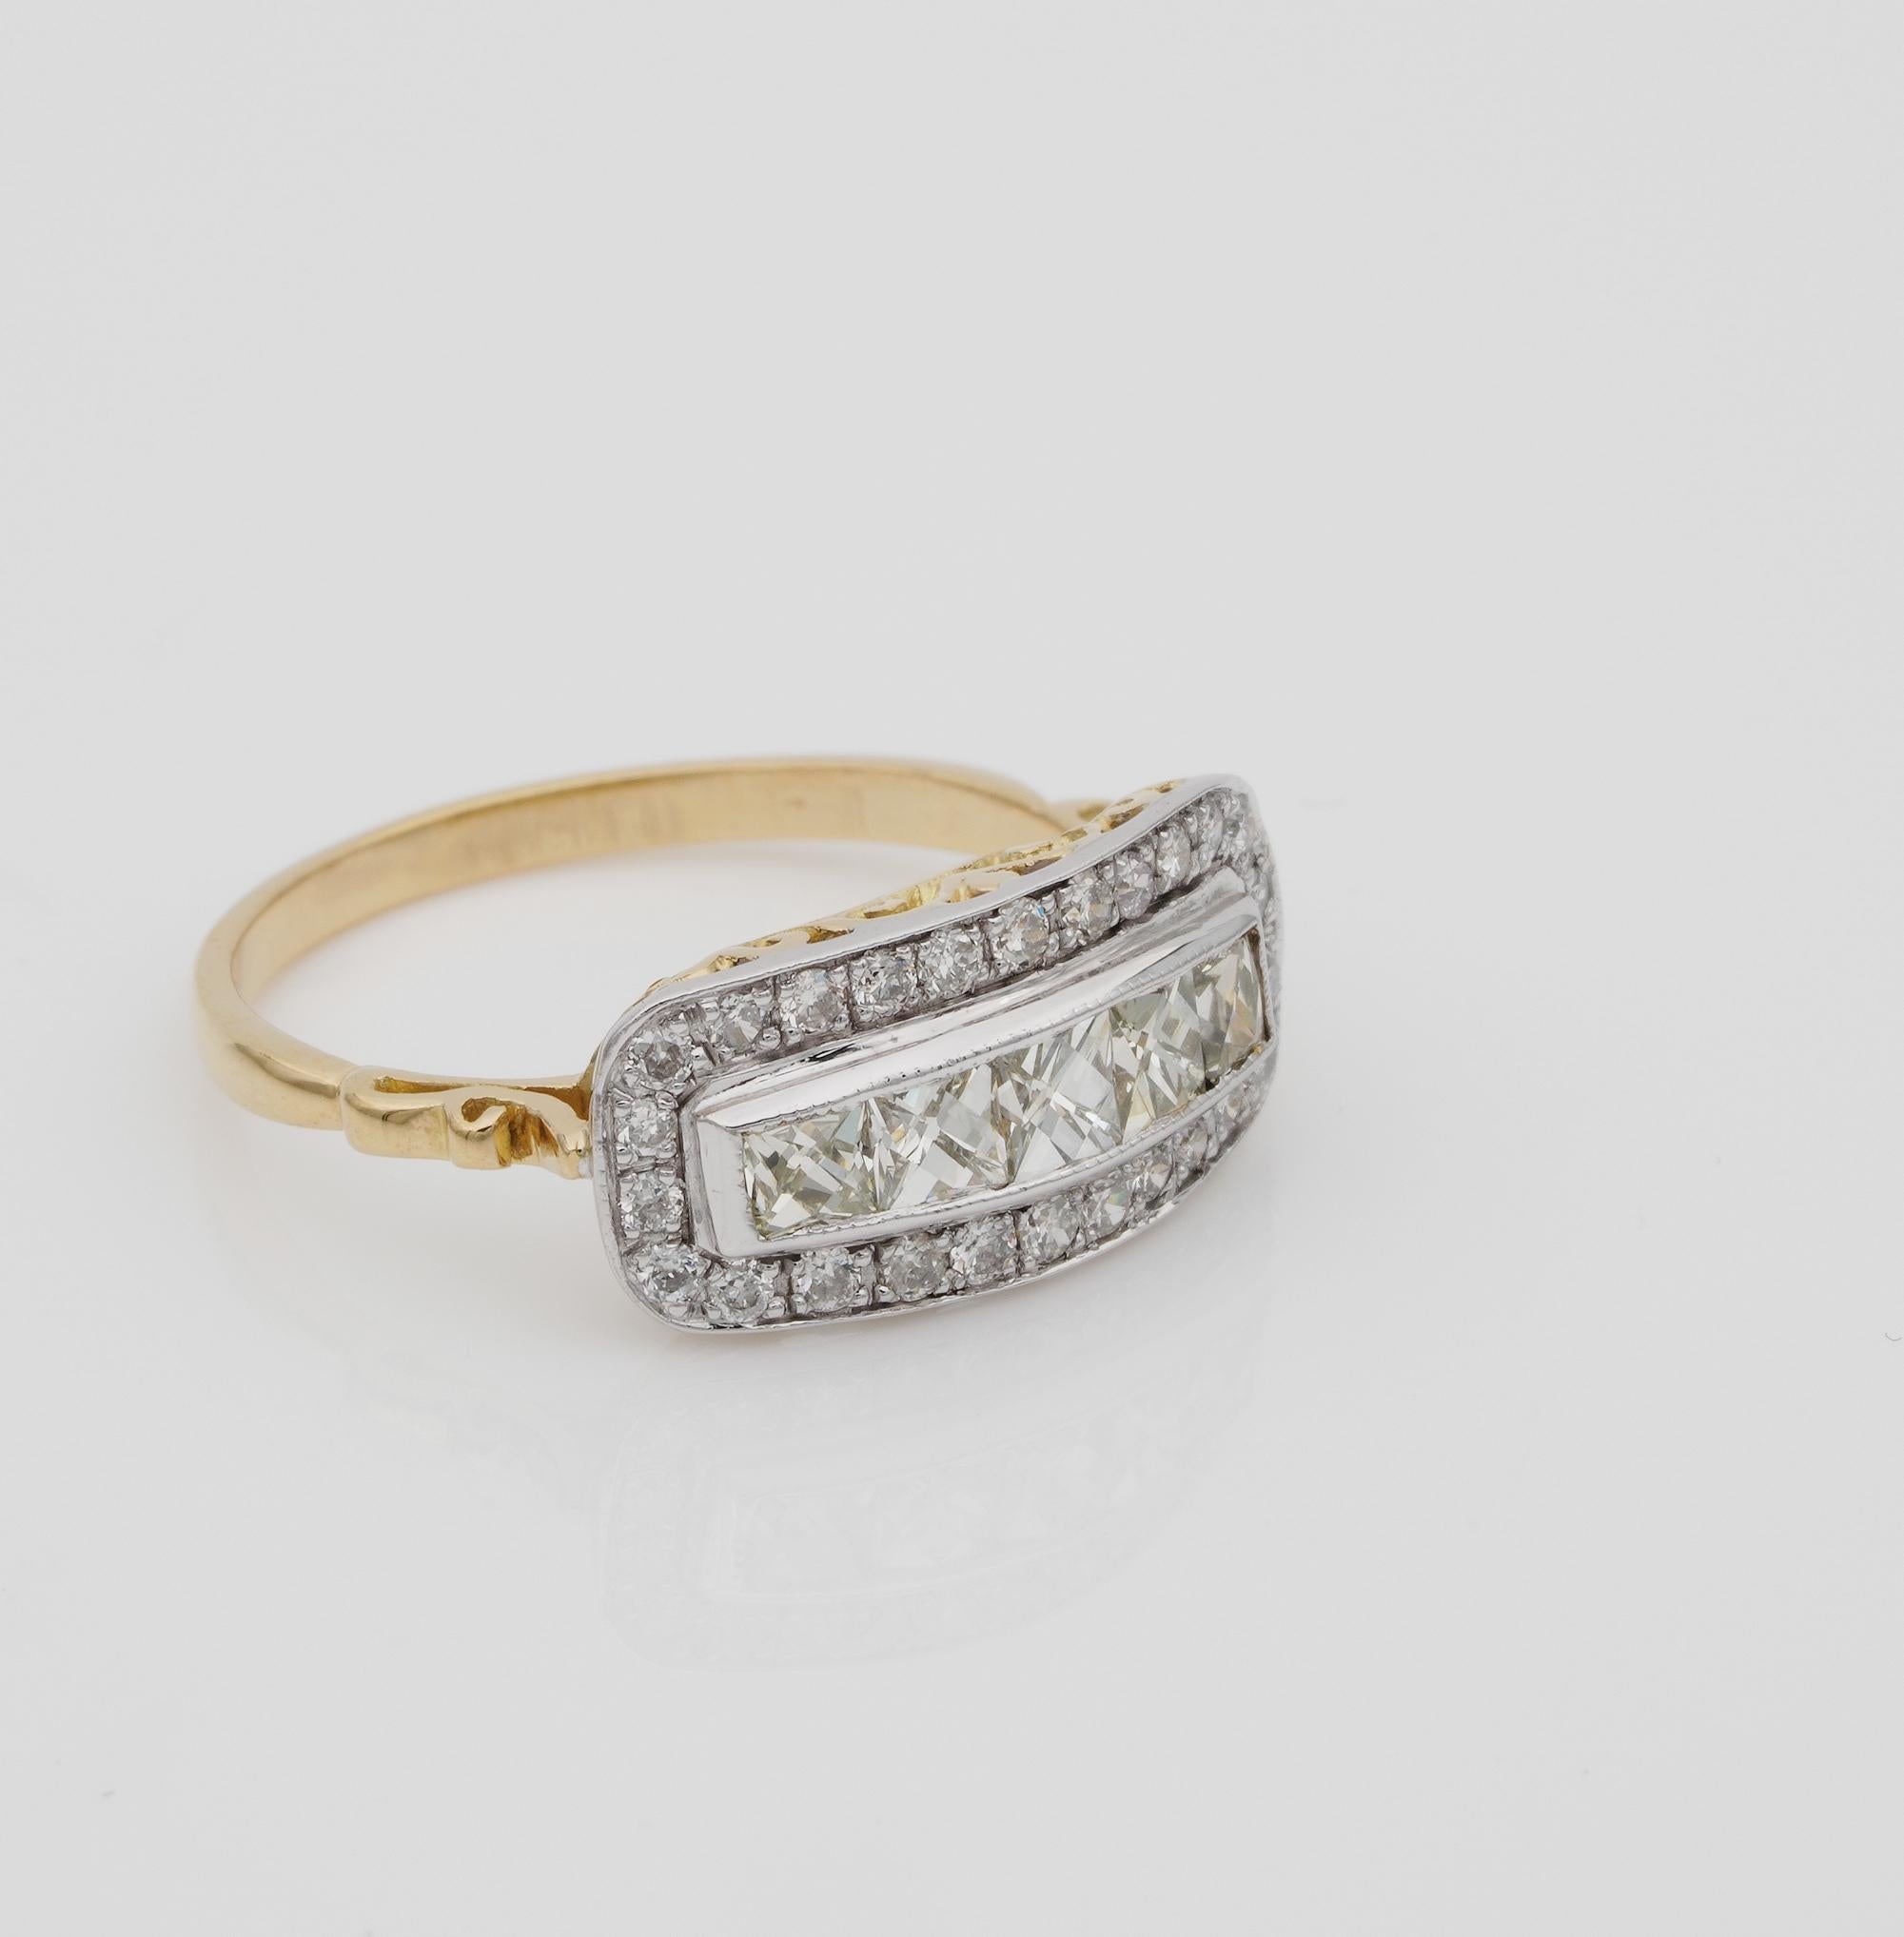 Belle Epoque French beauty!

One of a kind for distinctive design and rare French Diamond cut ring, this is Edwardian distinctive and premier five stone ring
Hand crafted of solid Platinum over the top with 18 KT yellow shank
Crown is set with a